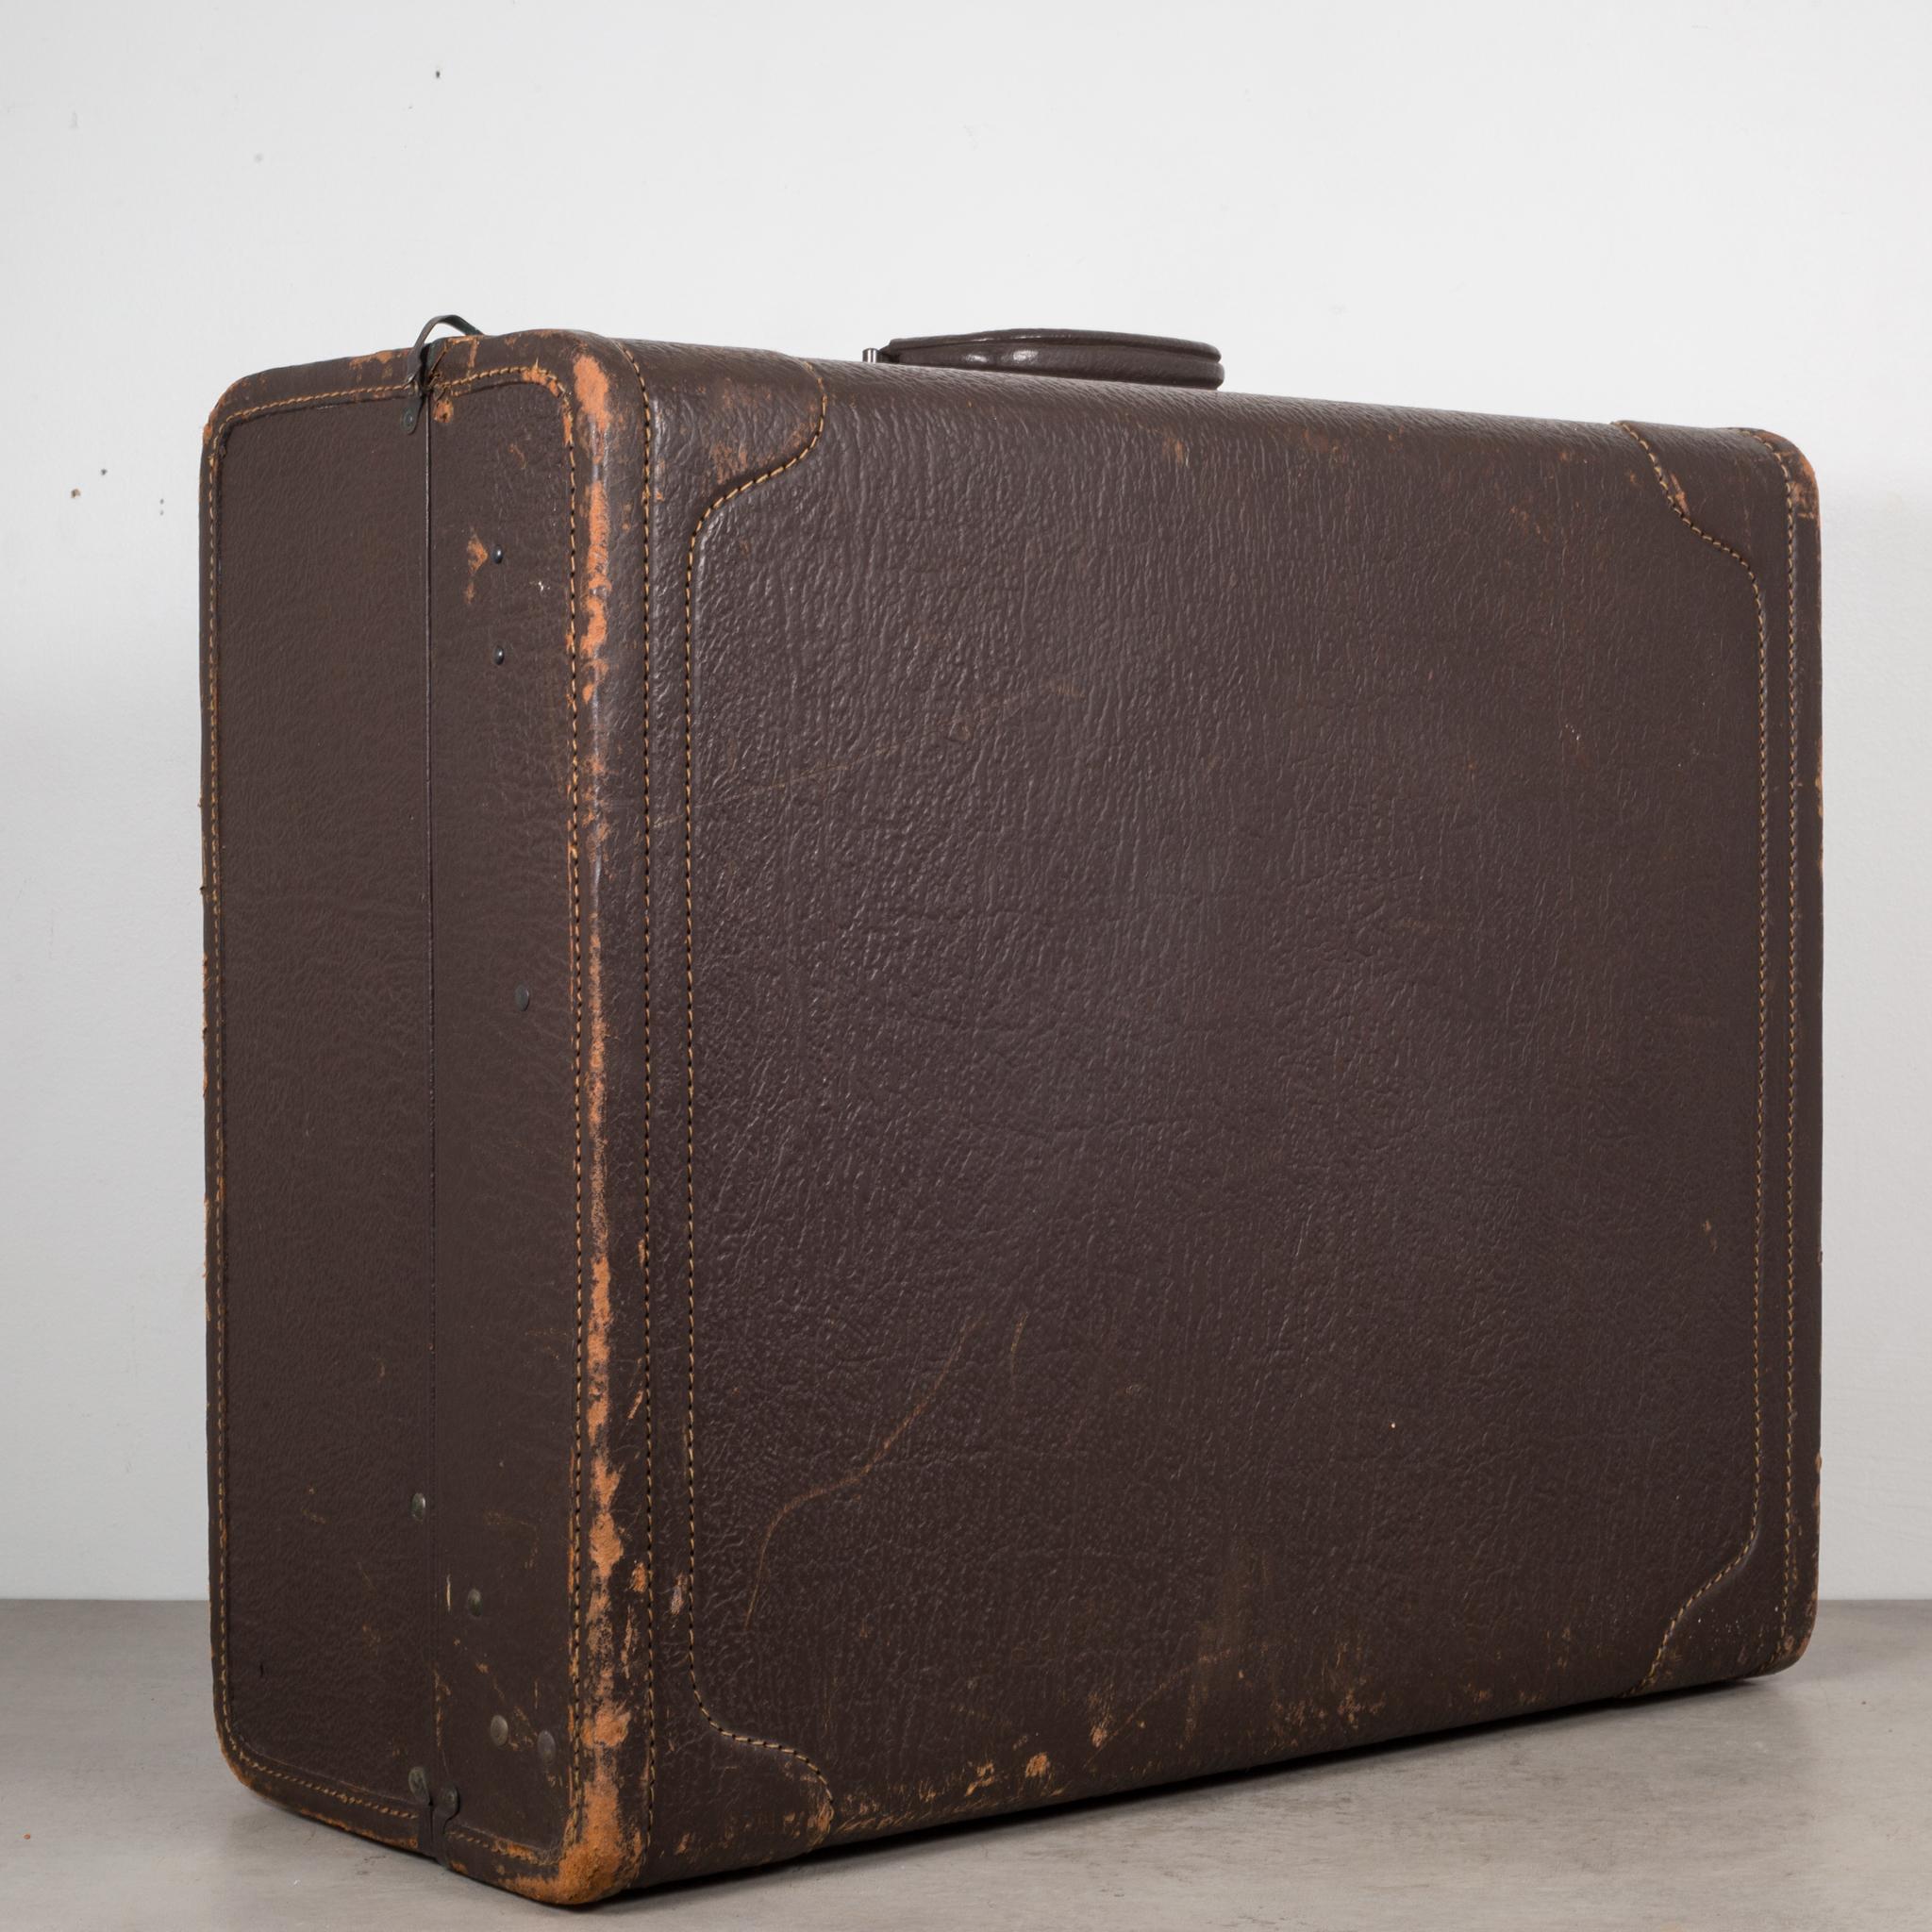 About

An all leather suitcase with stitched corners and a leather handle cover. The luggage is monogrammed 